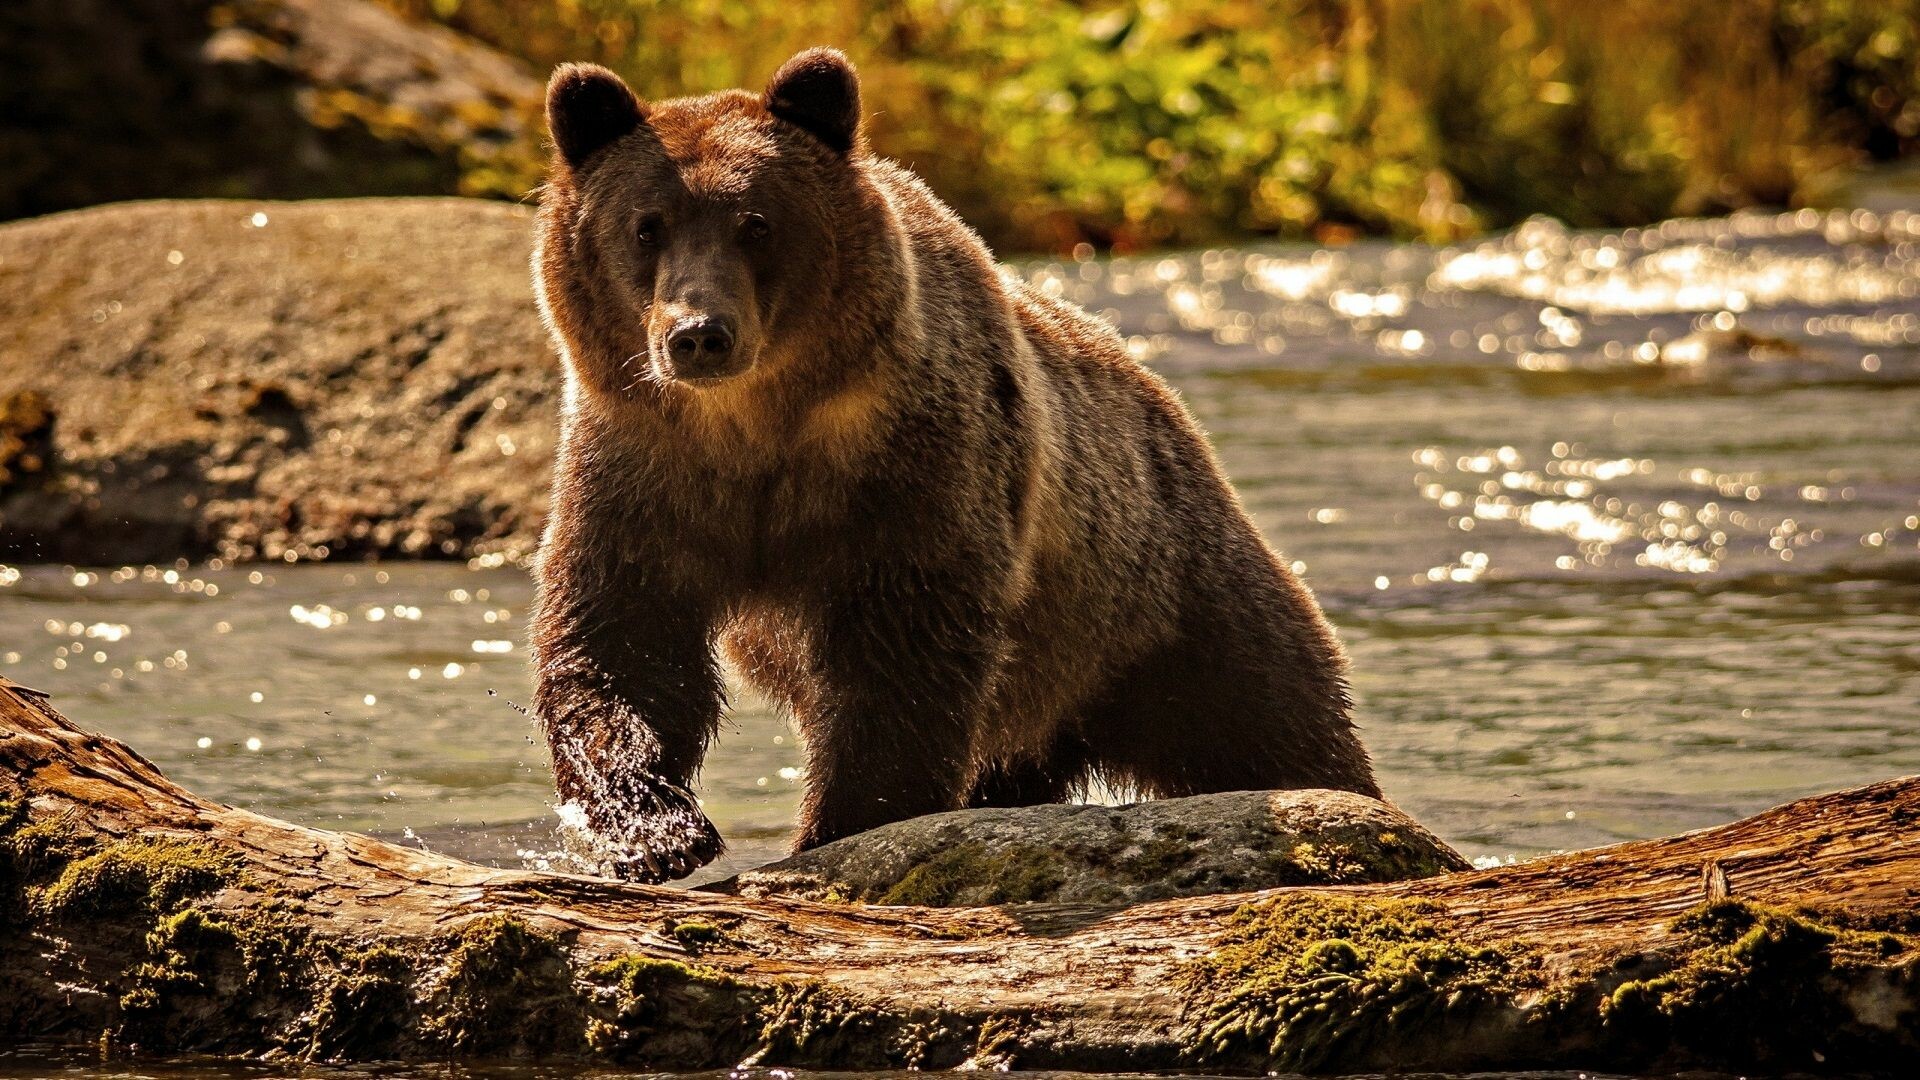 Bear: Grizzly, The subject of many Native American legends. 1920x1080 Full HD Wallpaper.